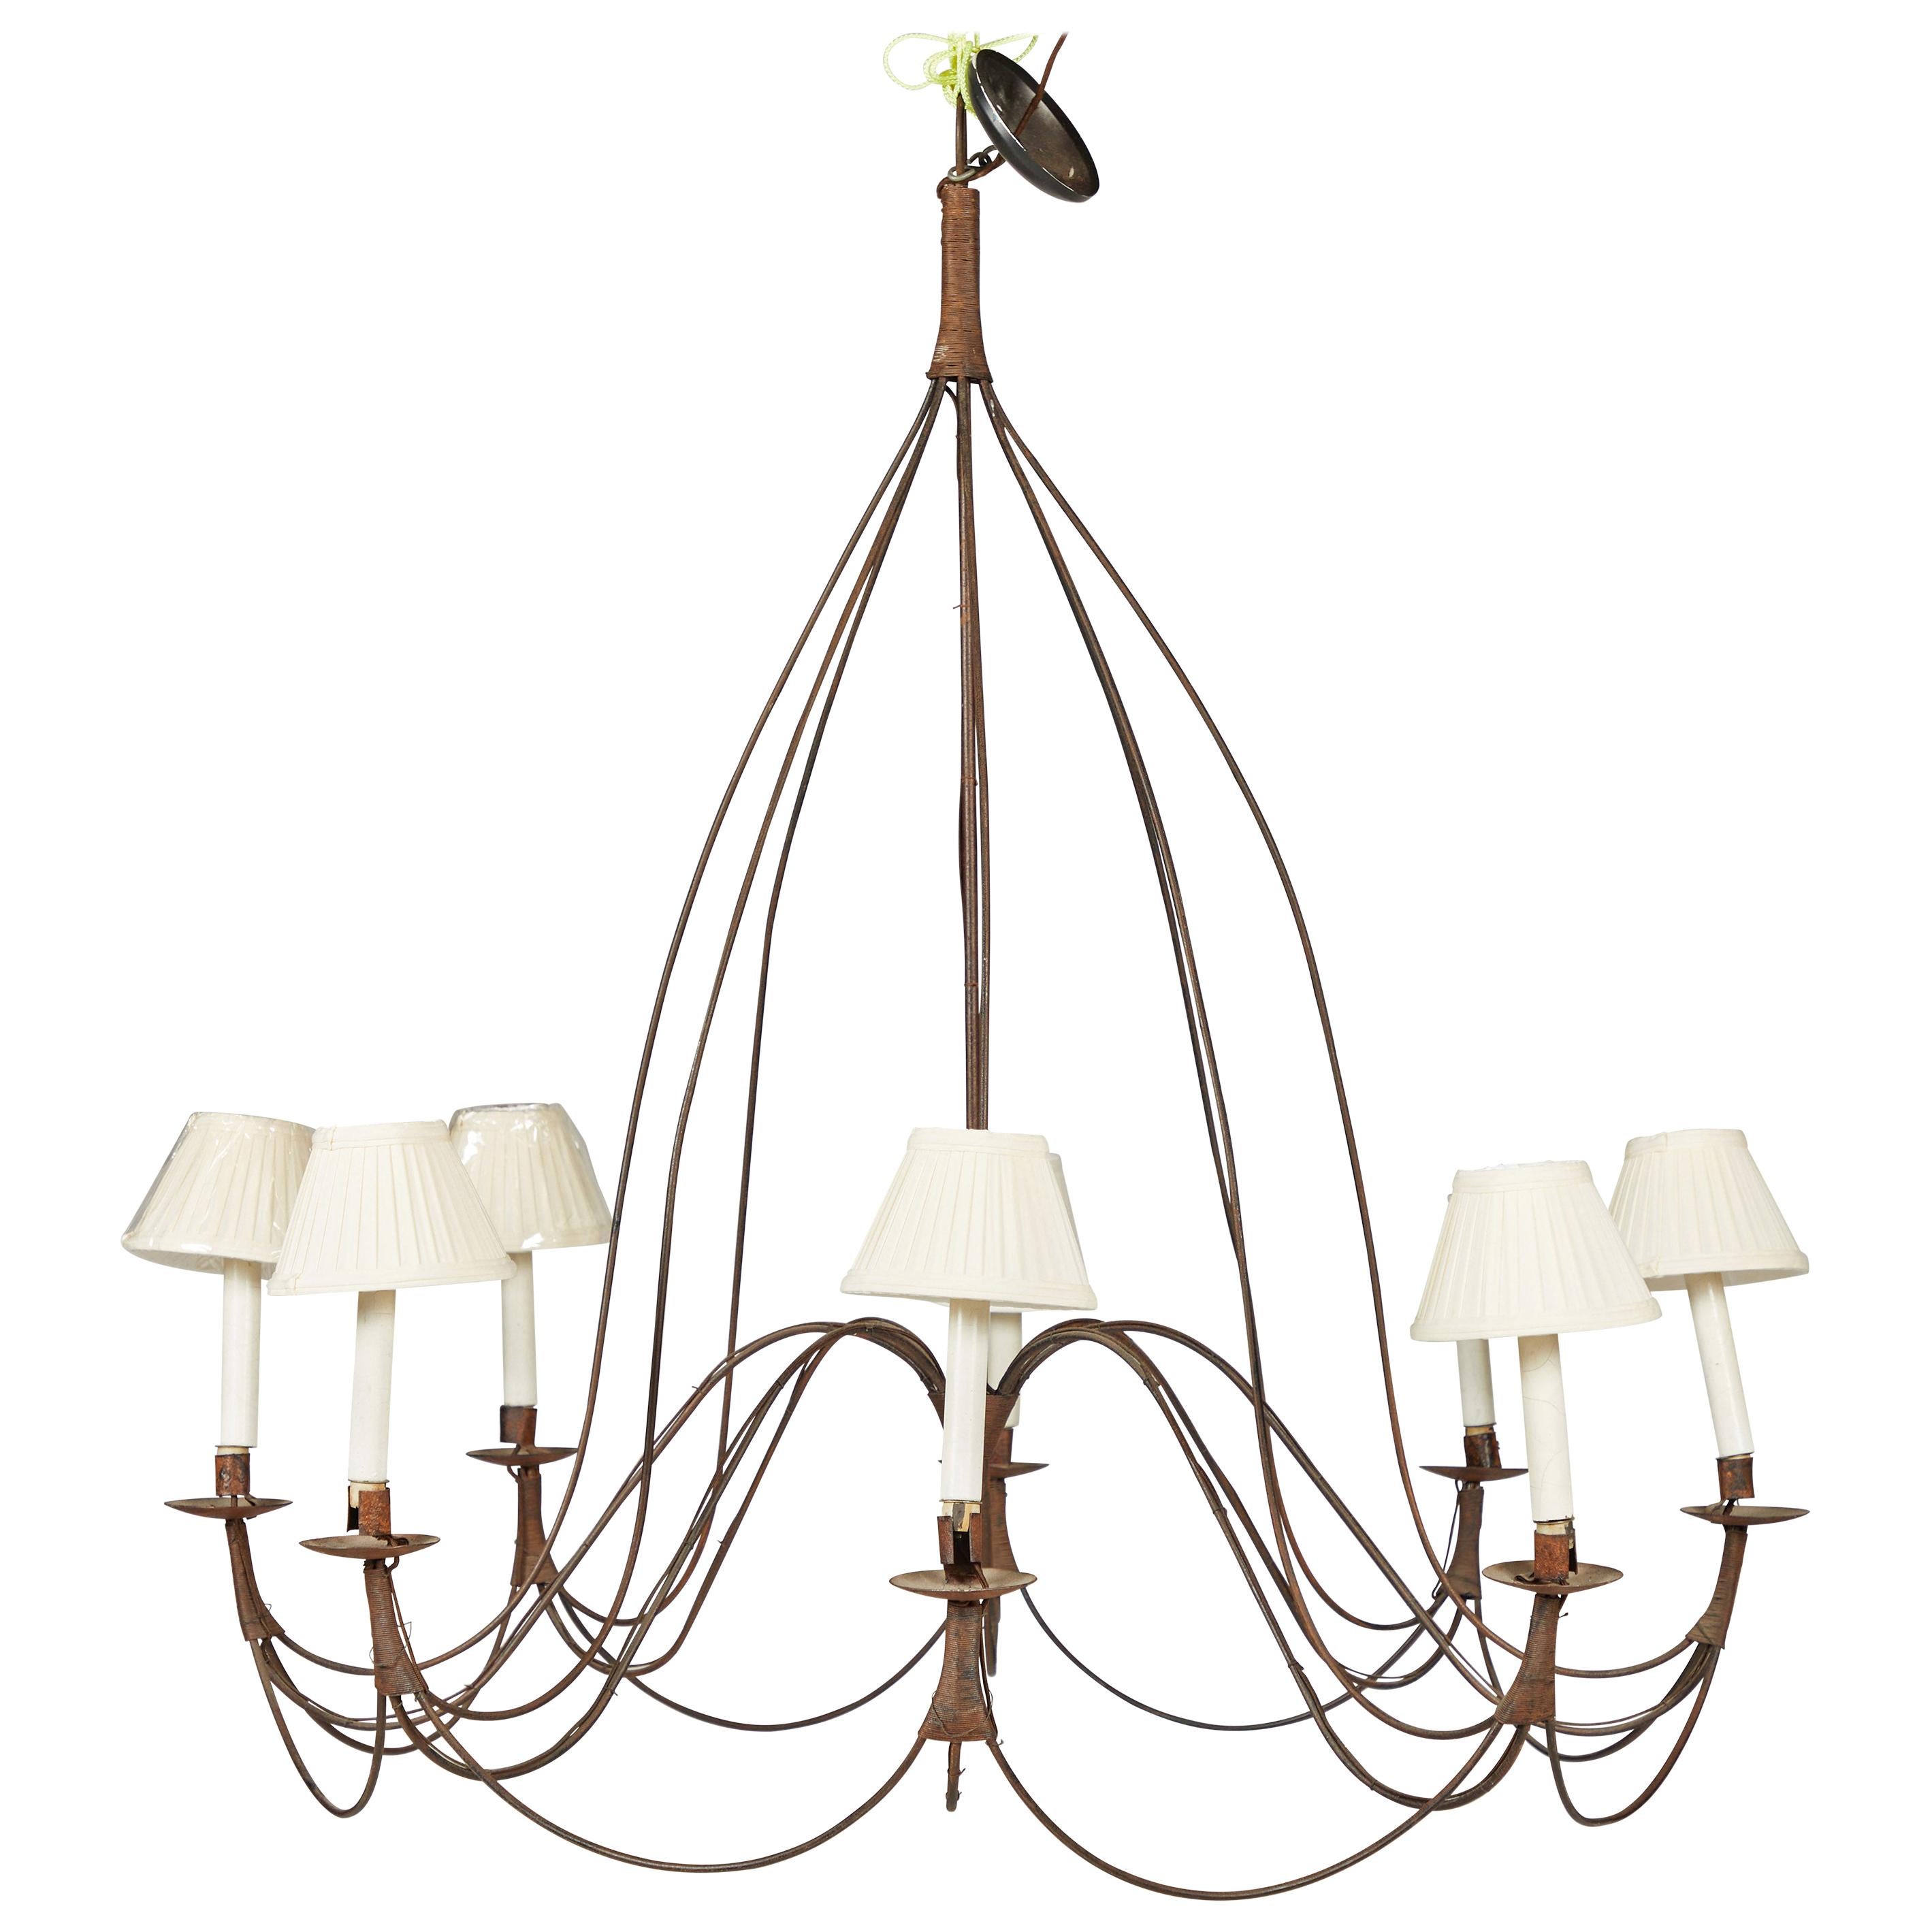 8 Light Rustic French Chandelier